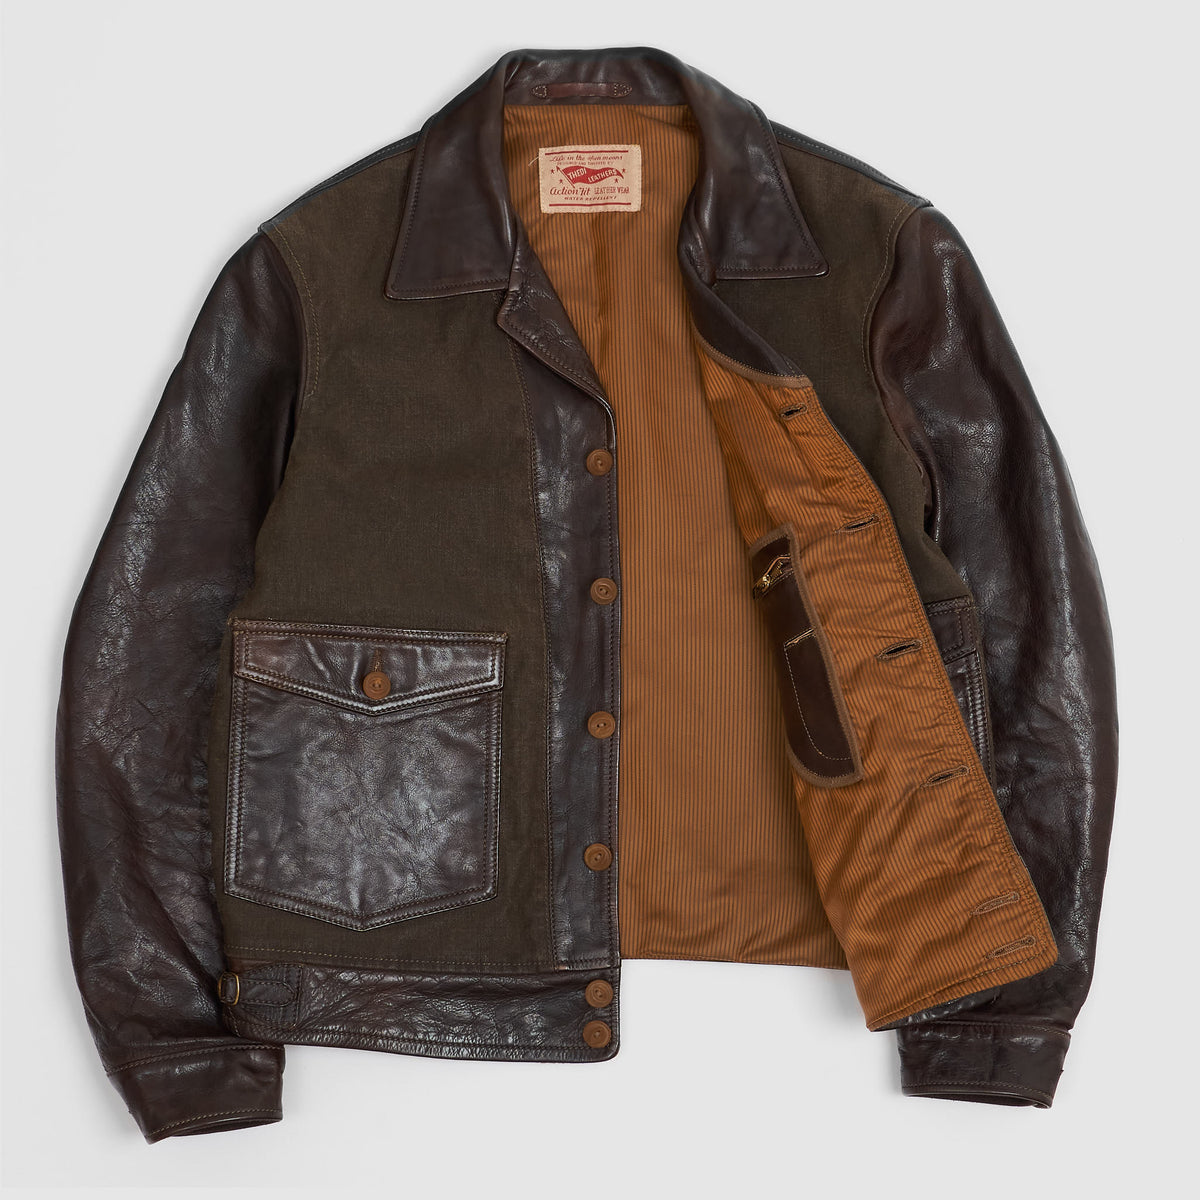 Thedi Leathers Two-Tone Canvas Jacket - DeeCee style